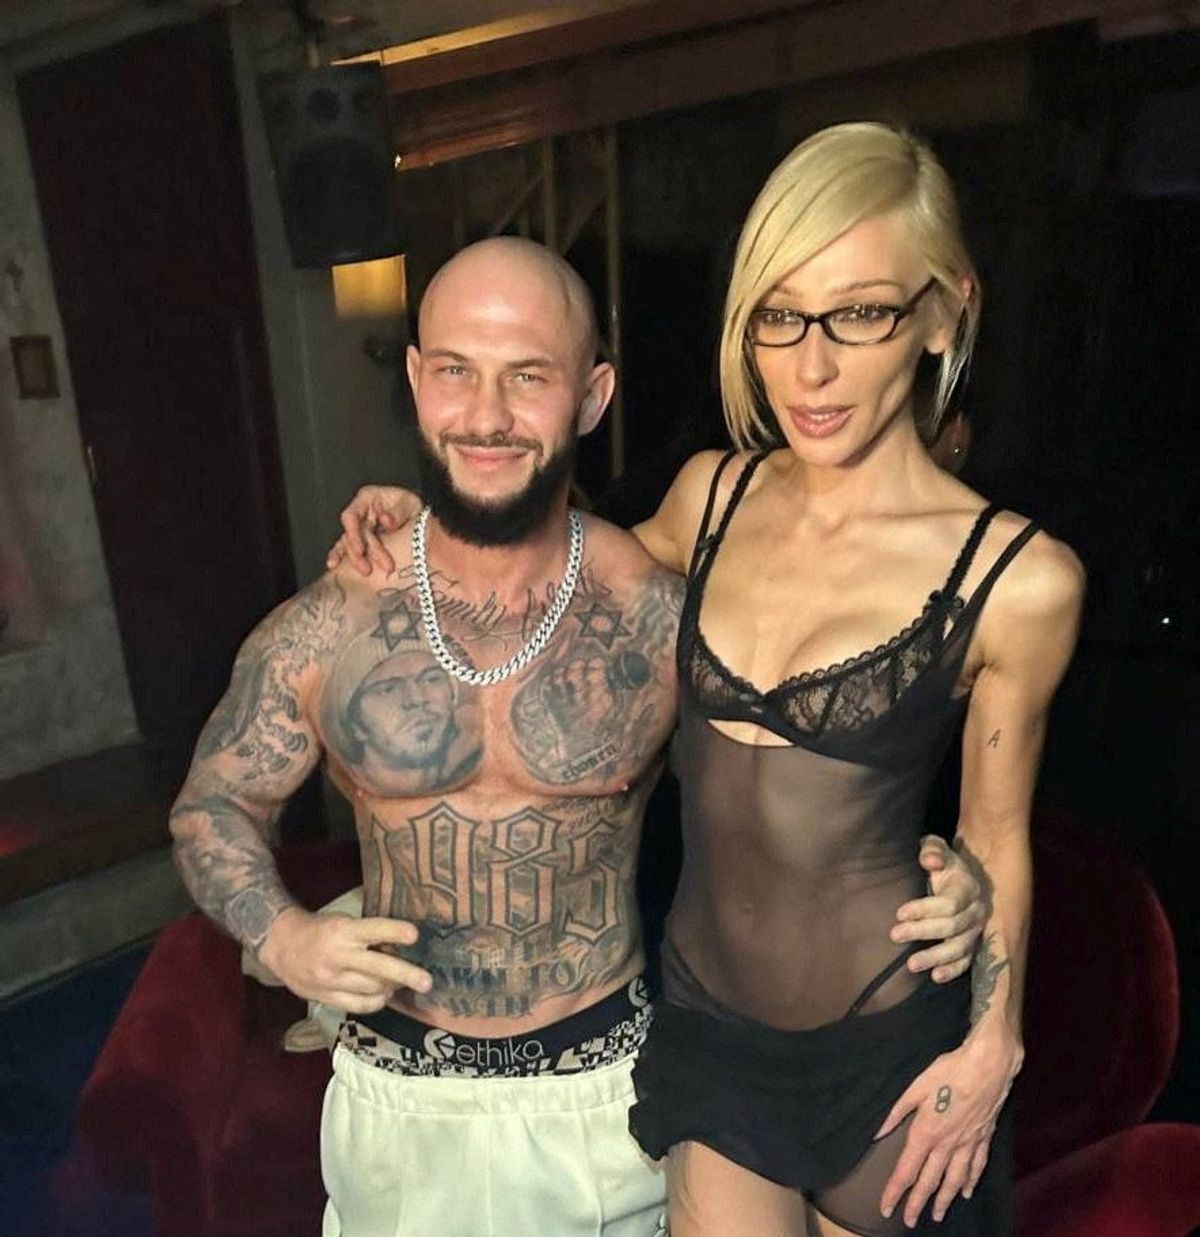 Russian blogger Anastasia (Nastya) Ivleeva poses for a picture with rapper GeeGun during an "almost naked" party at Mutabor nightclub in Moscow, Russia, in this image published December 21, 2023.